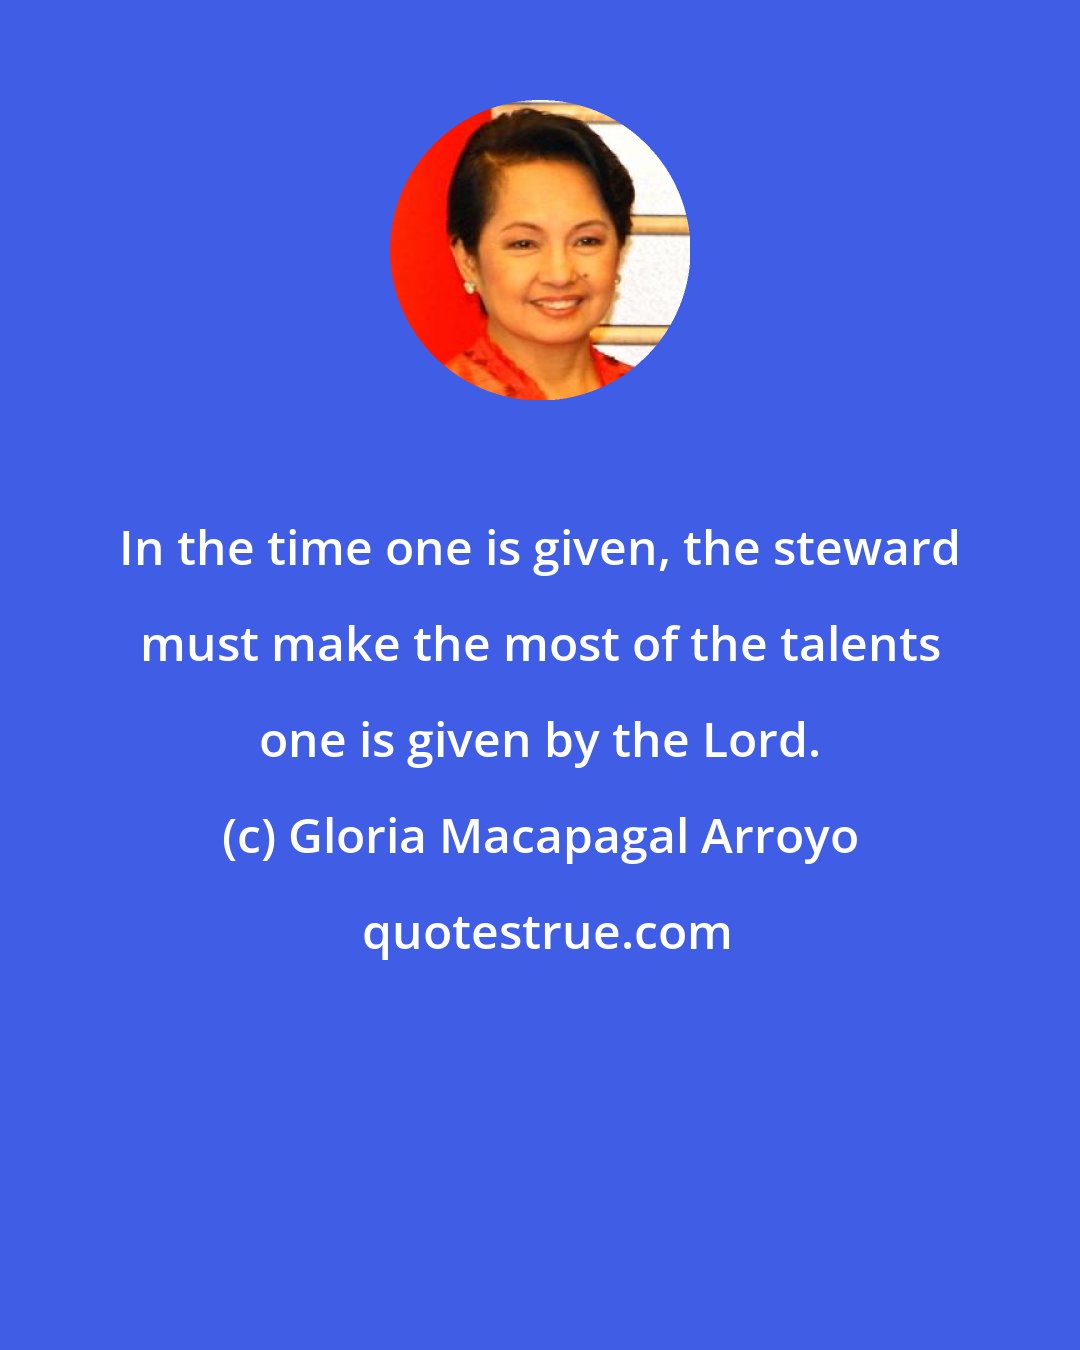 Gloria Macapagal Arroyo: In the time one is given, the steward must make the most of the talents one is given by the Lord.